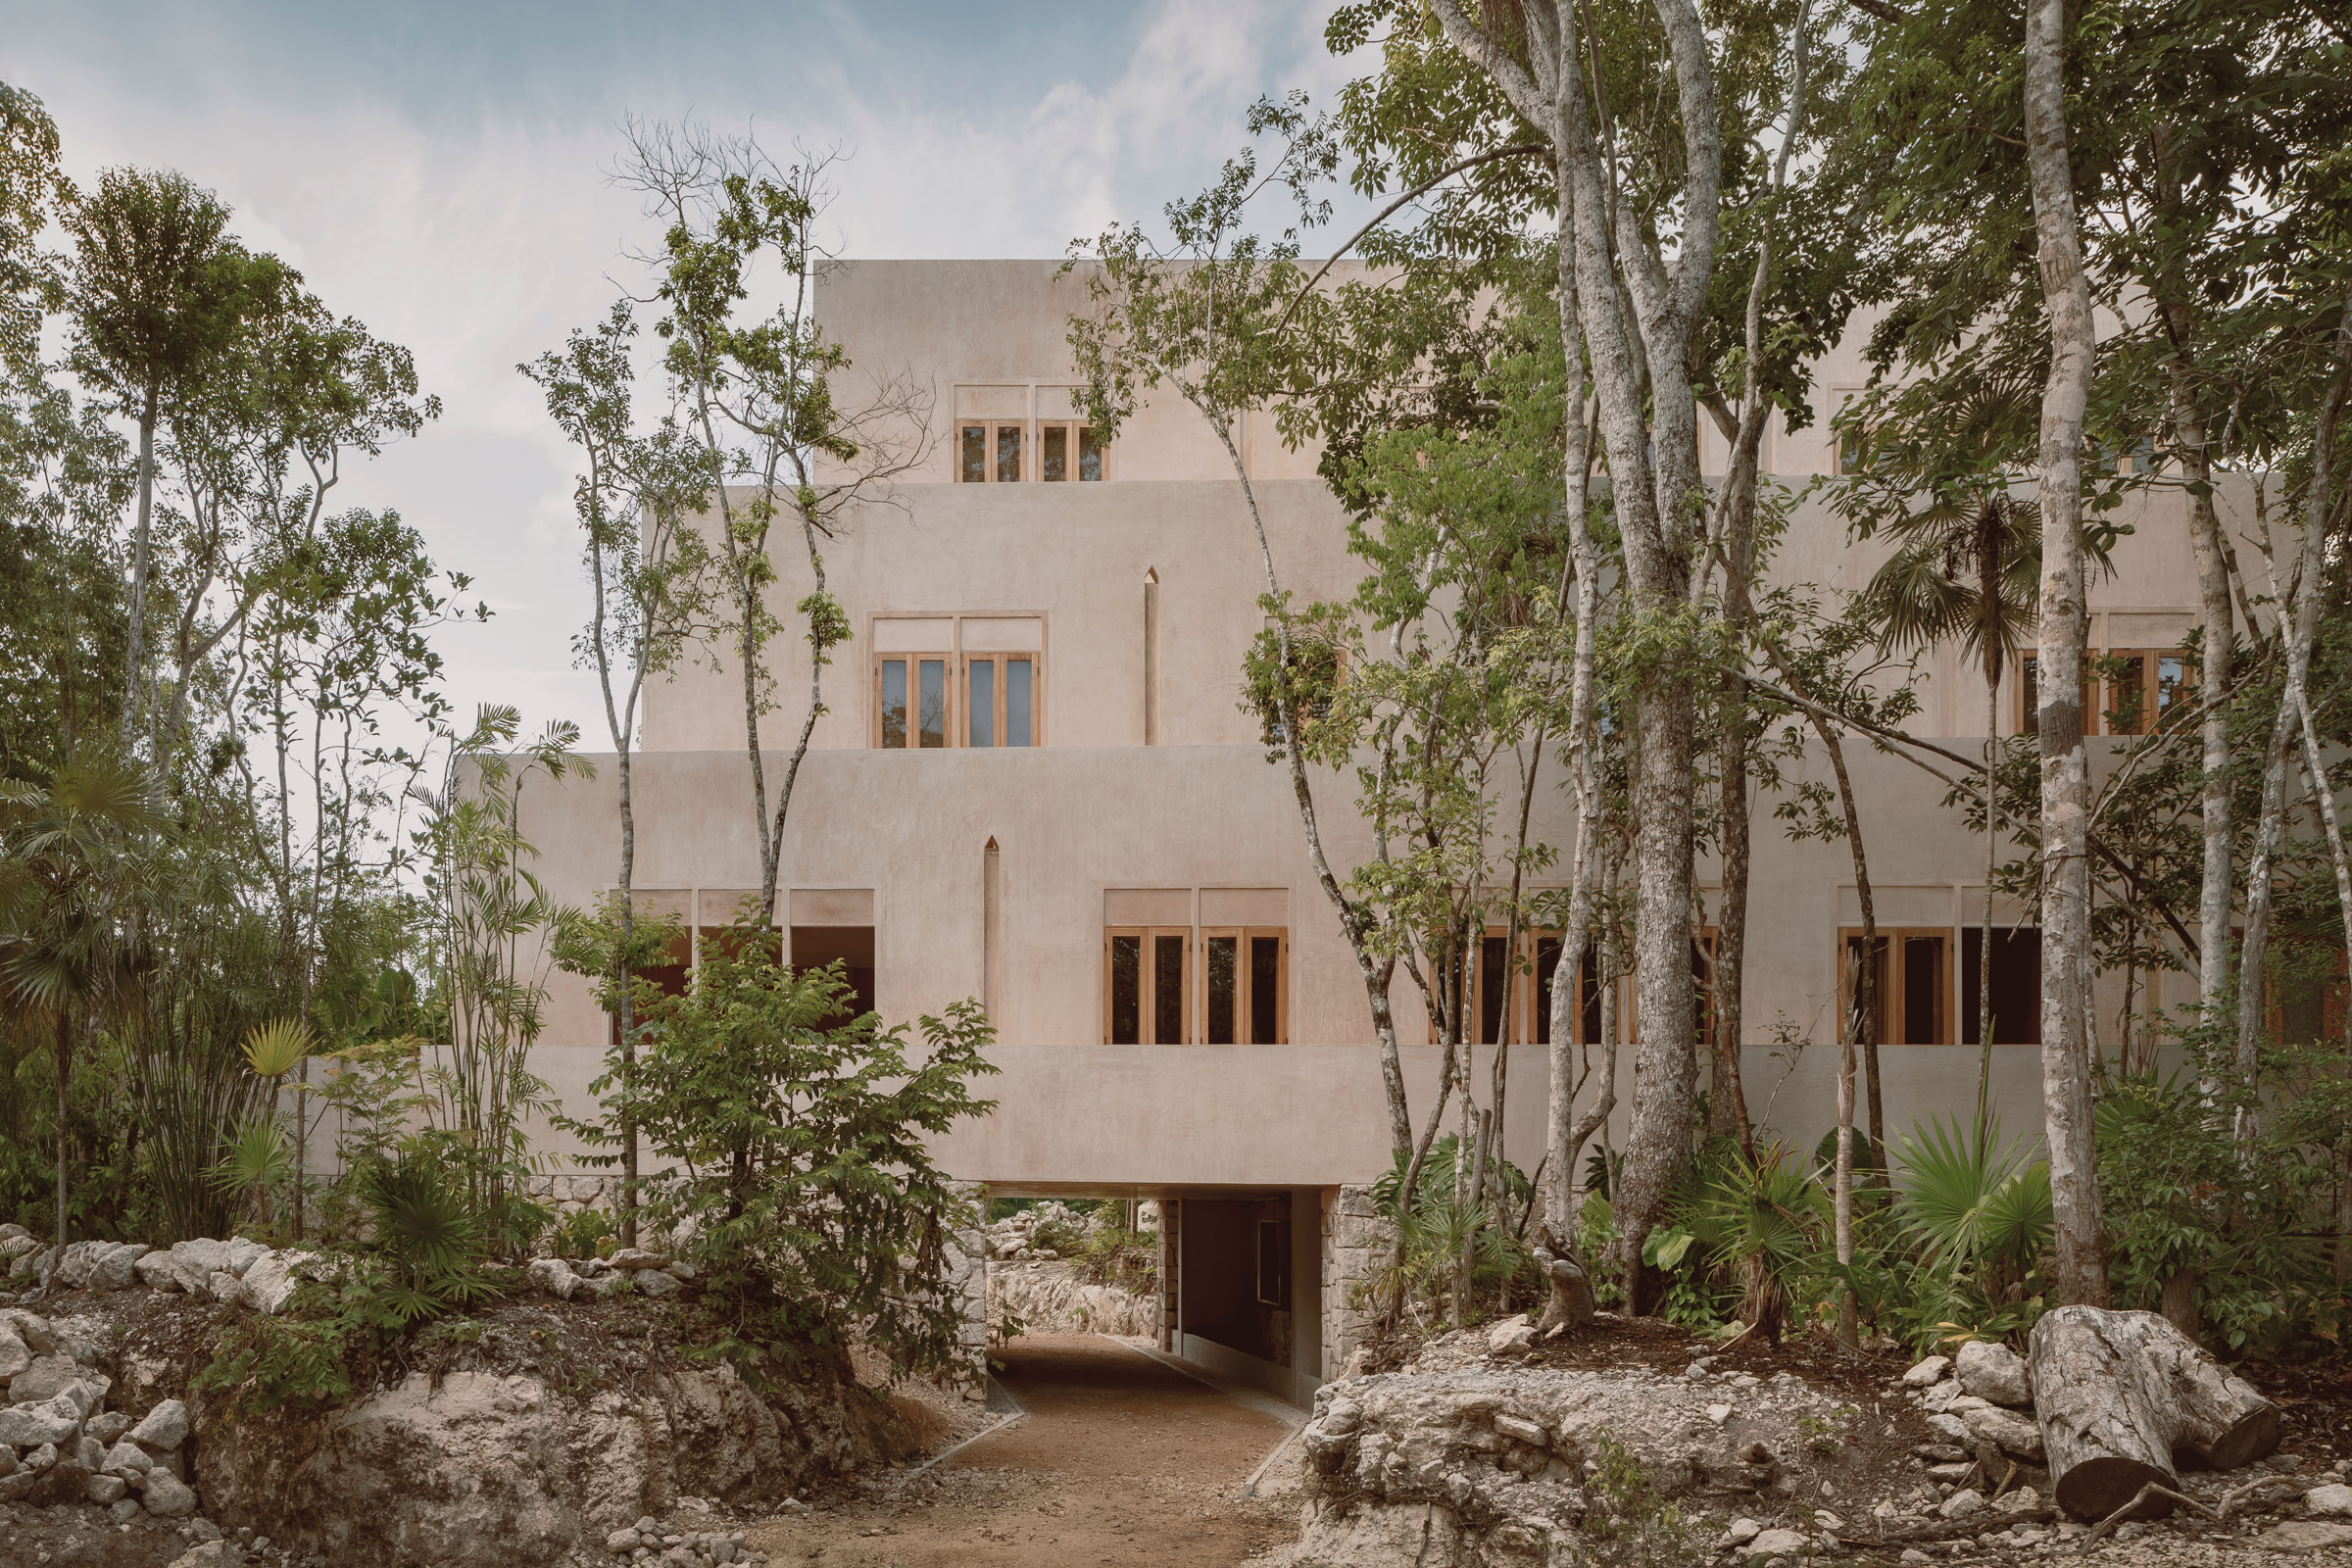 Casa Candela Residential Villas Designed with Cultural Integrity and Sustainability